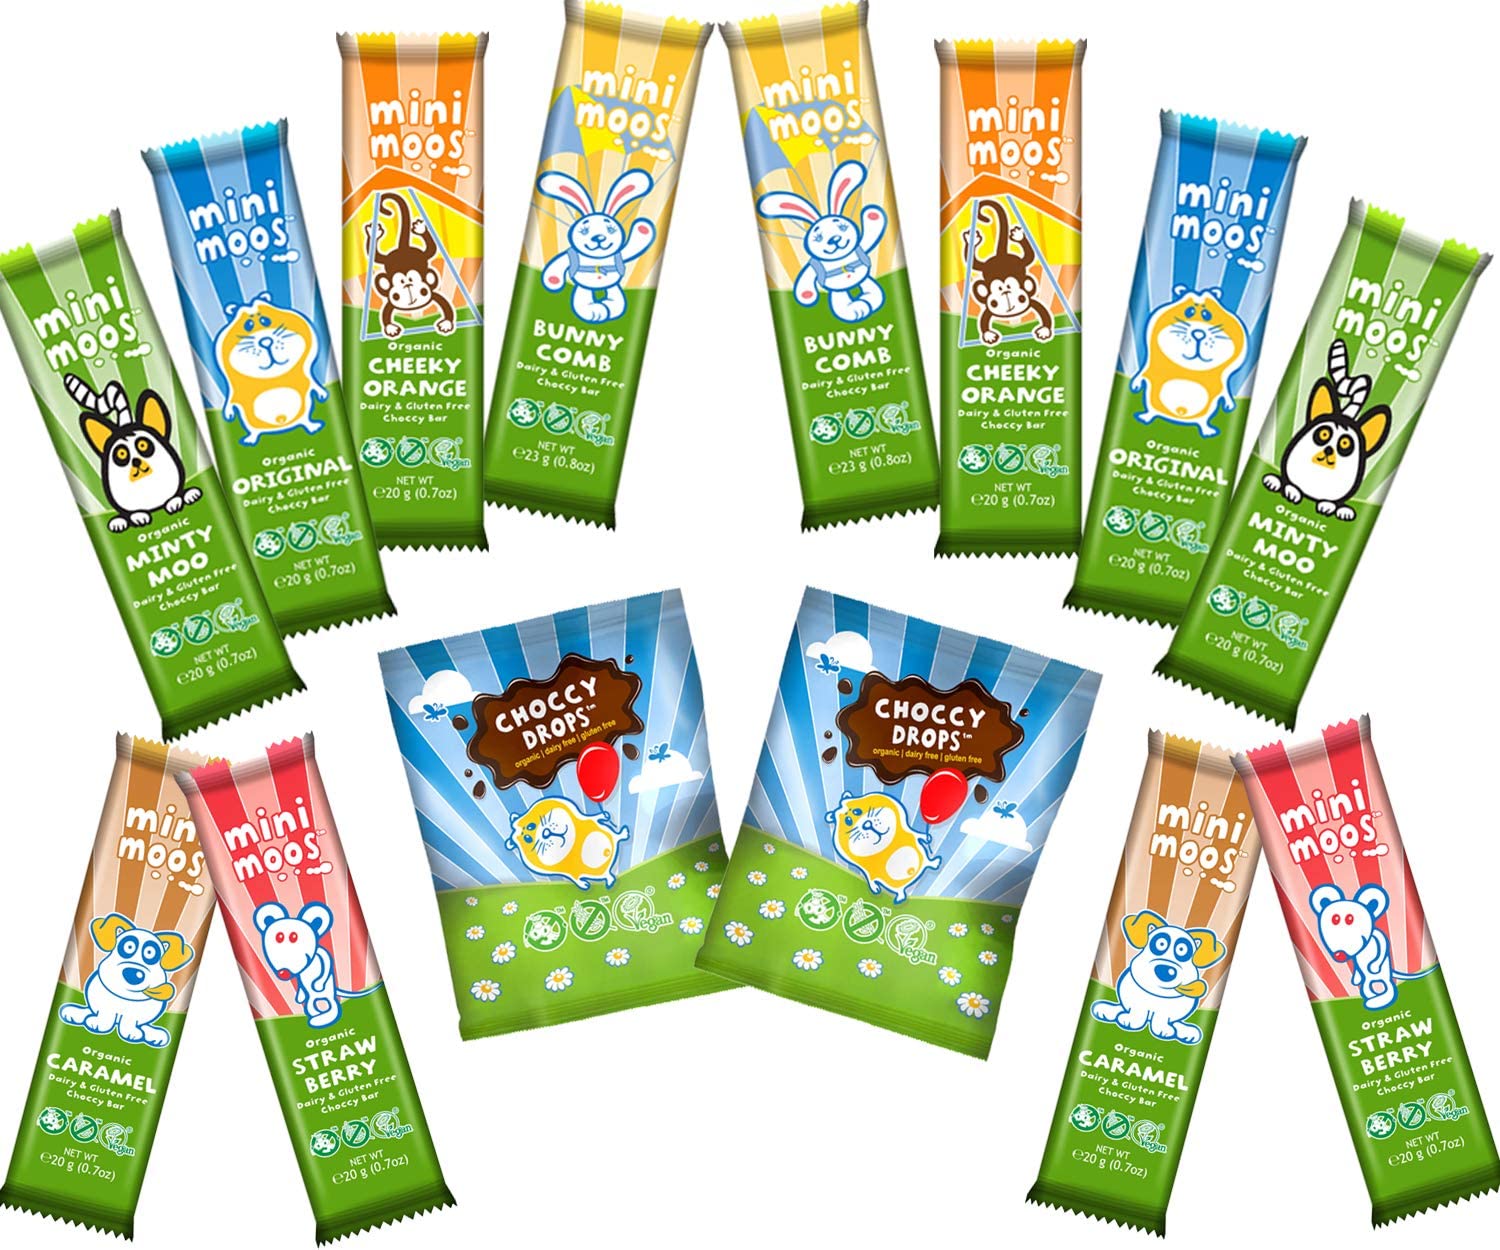 Moo Free Dairy Free Chocolate 14x Items Mixed Case